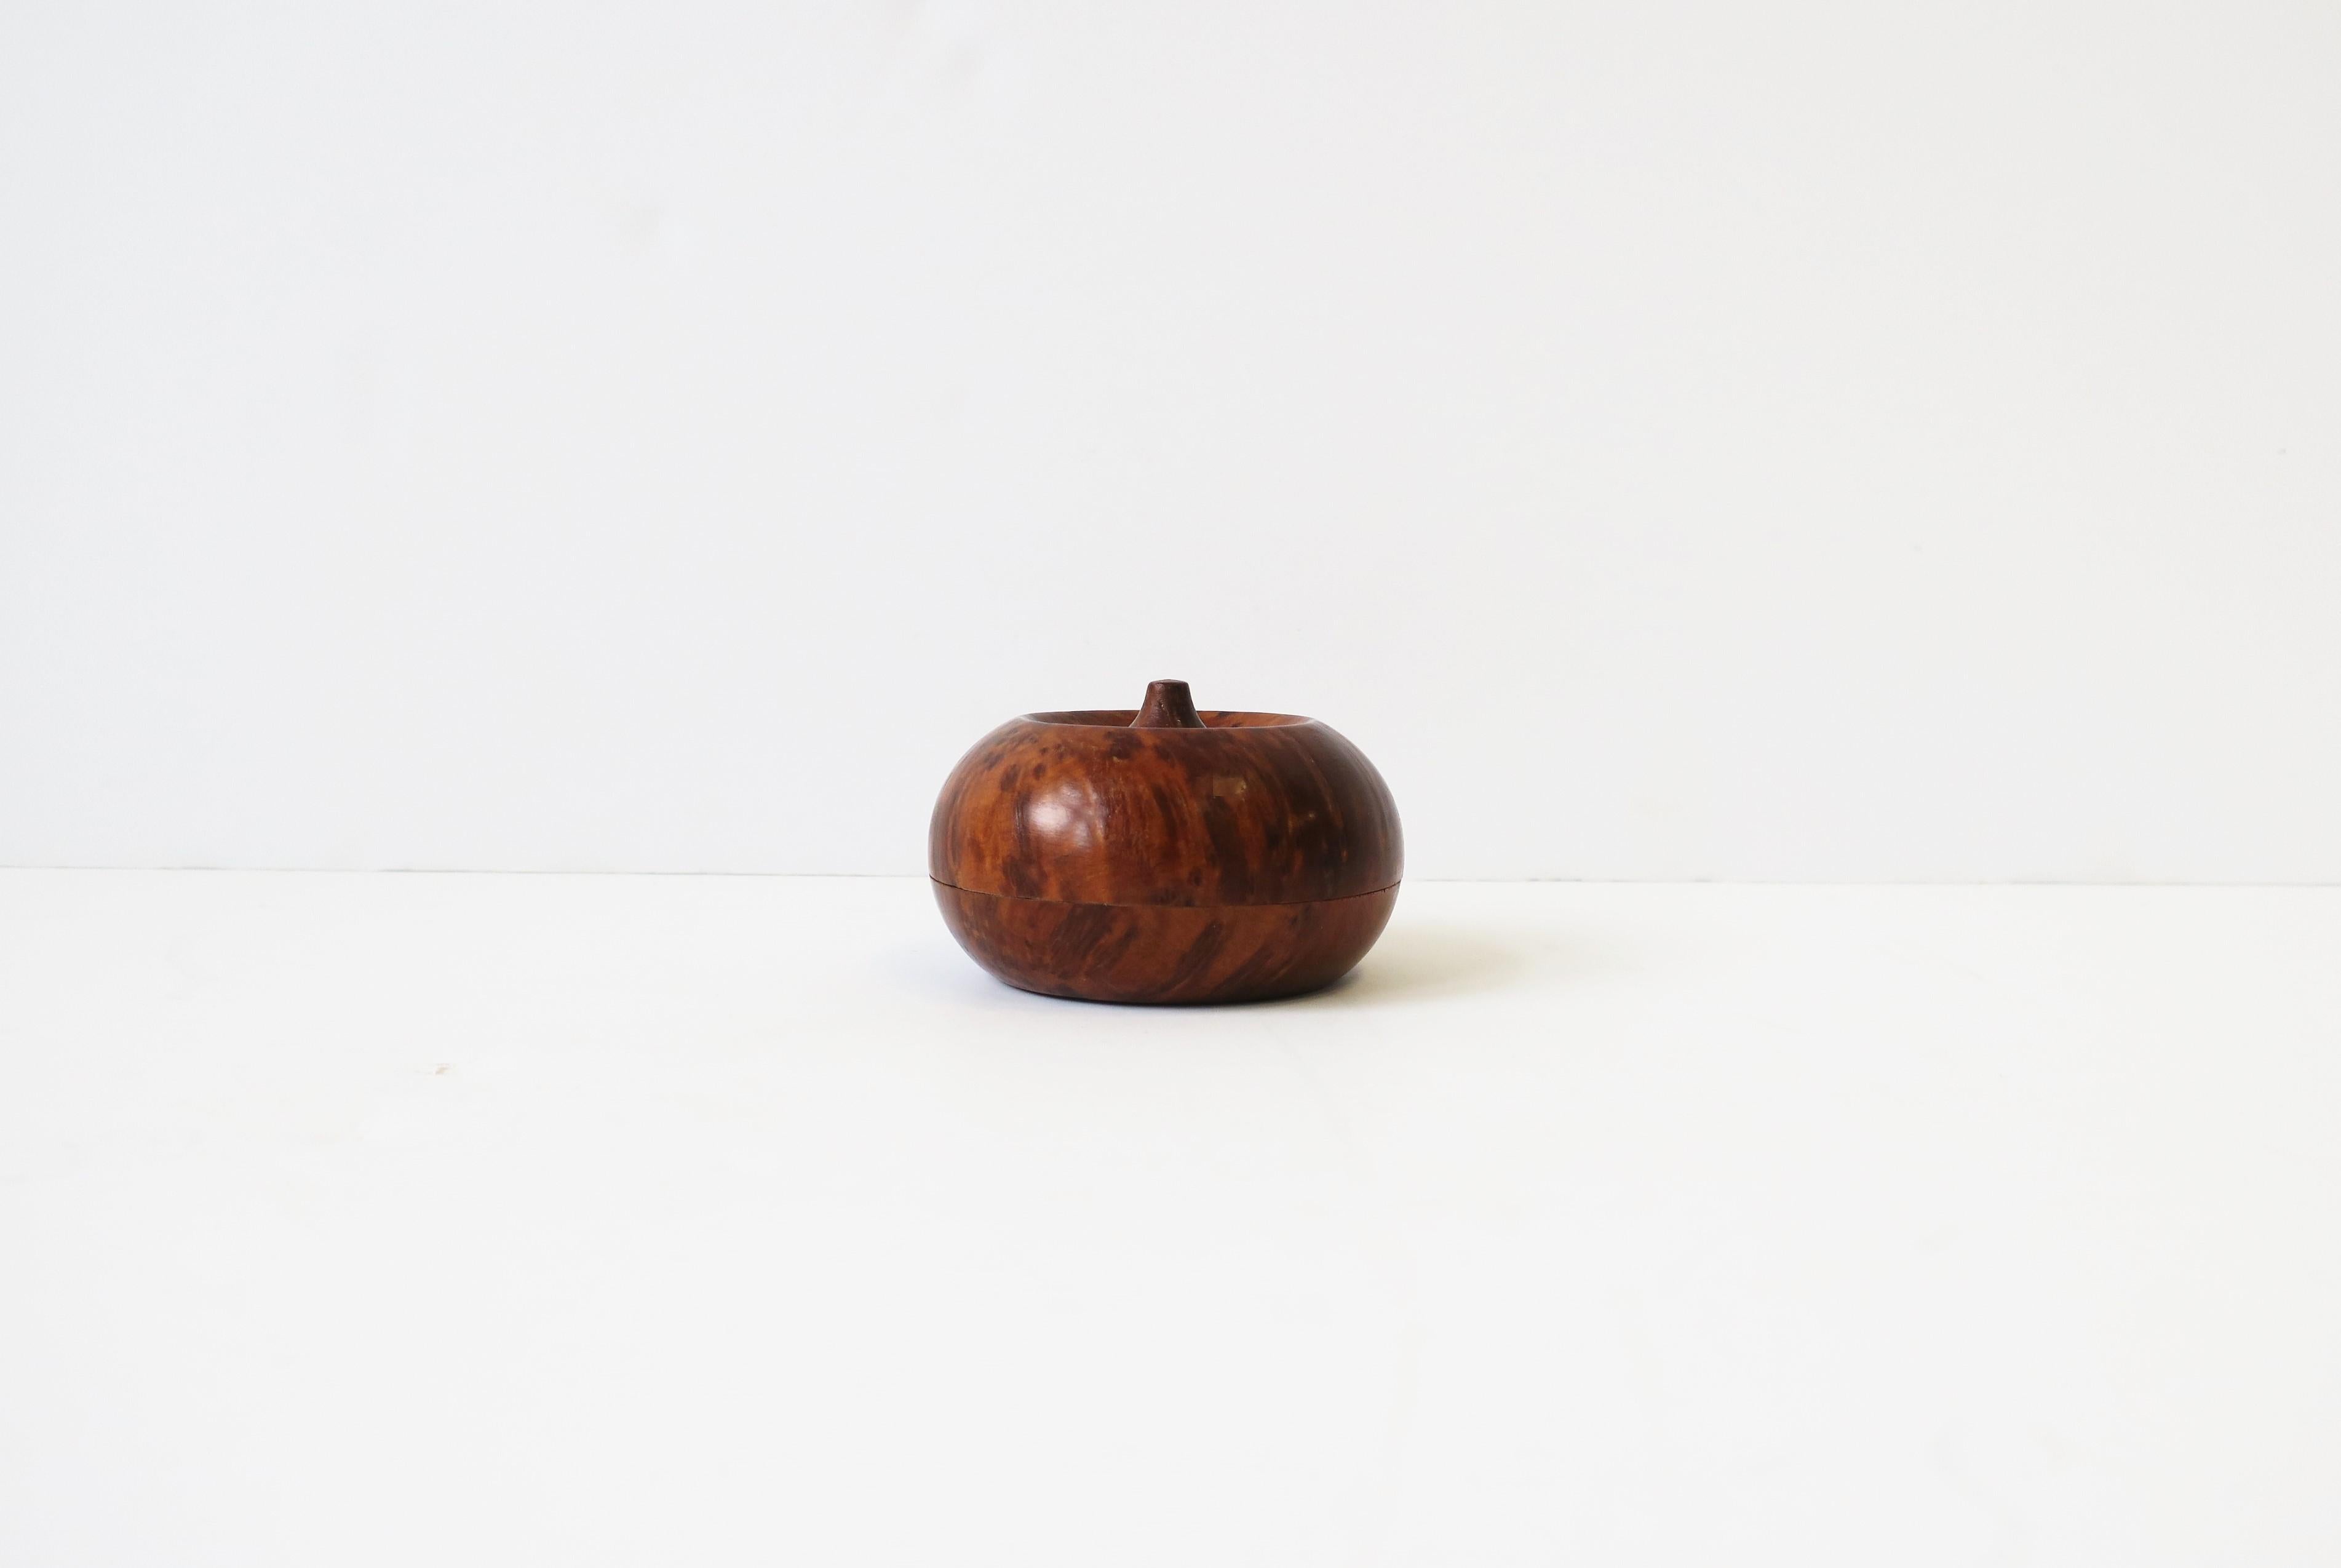 A small burl wood round box with lid, circa late 20th century. A great piece to hold small jewelry (as demonstrated) or other small items on a vanity, desk, nightstand table, dresser, etc. Very good condition as shown in images. Dimensions: 2.75